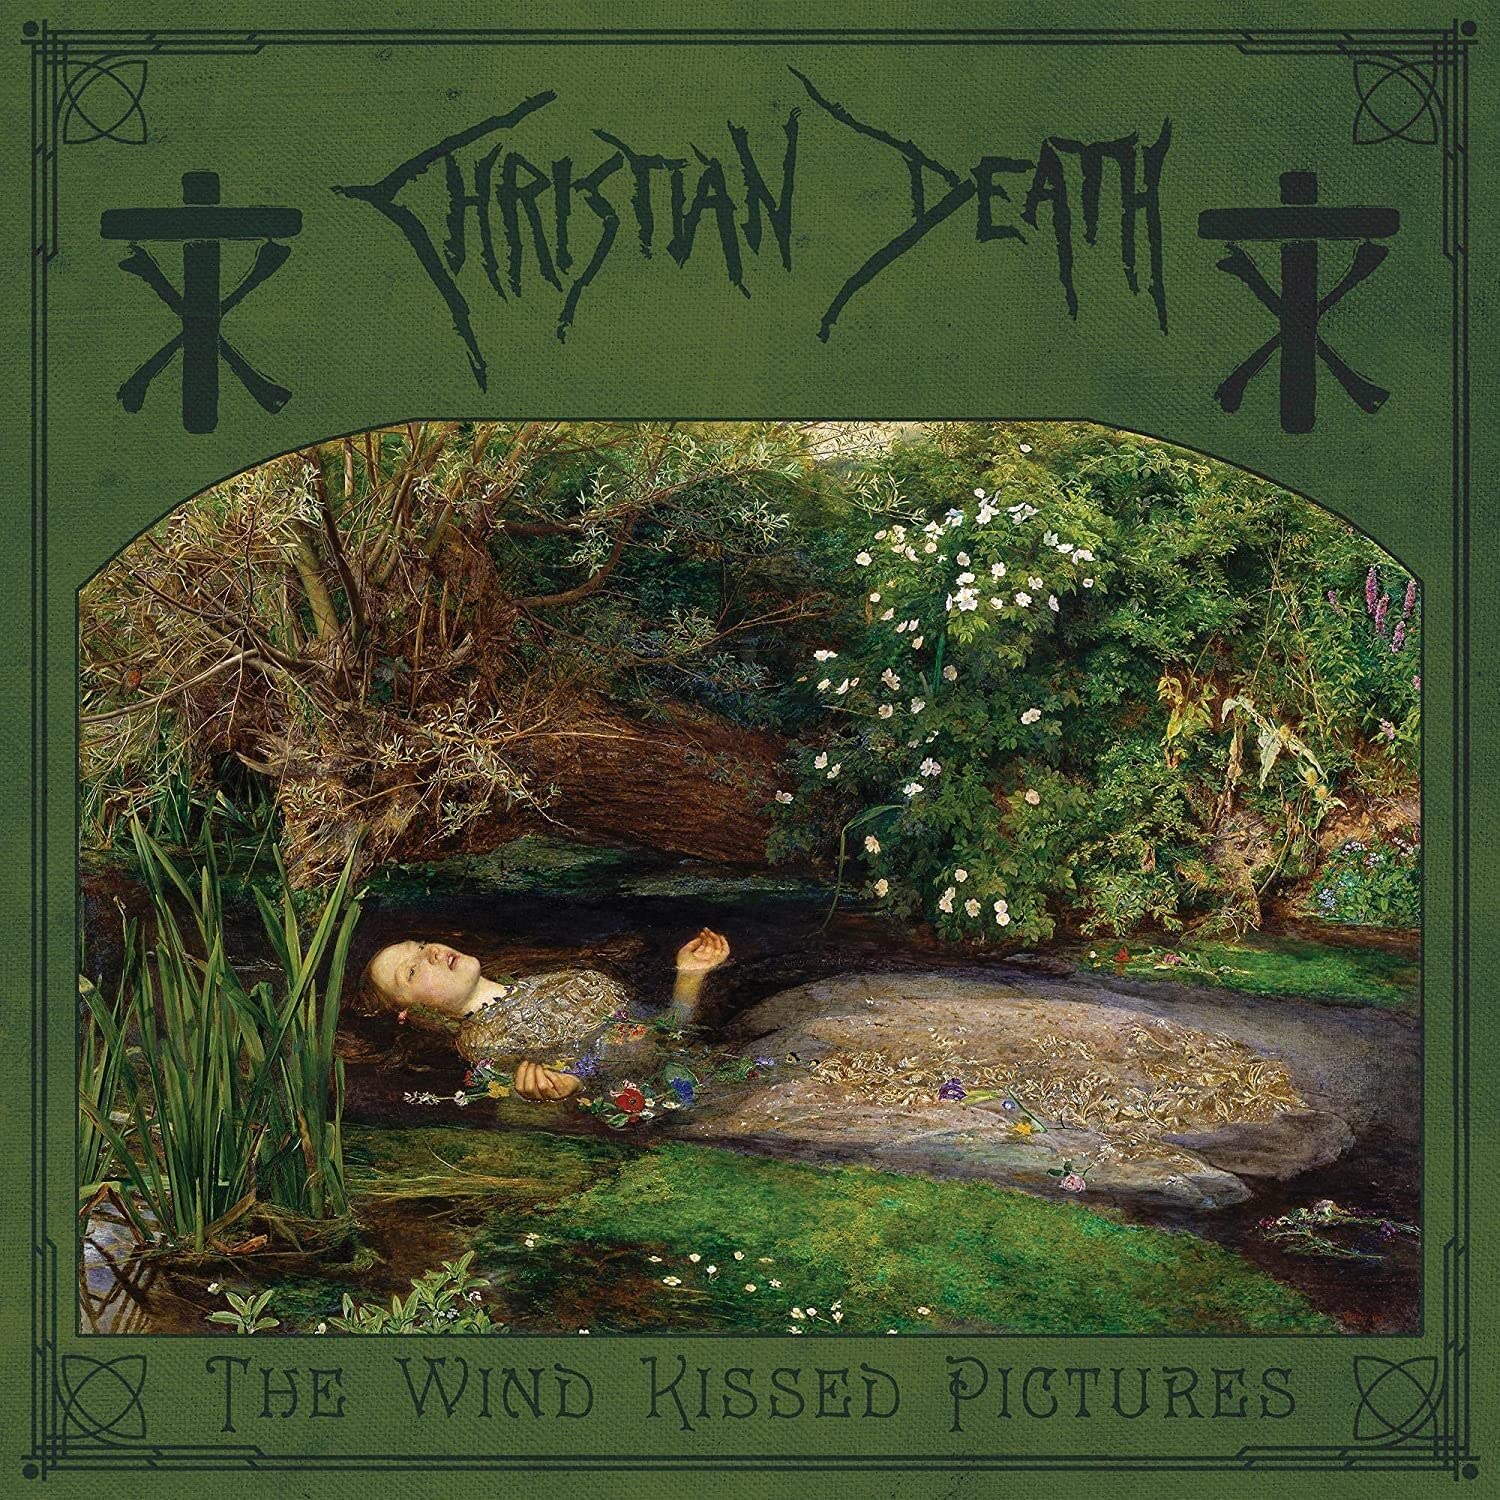 CHRISTIAN DEATH – The Wind Kissed Pictures